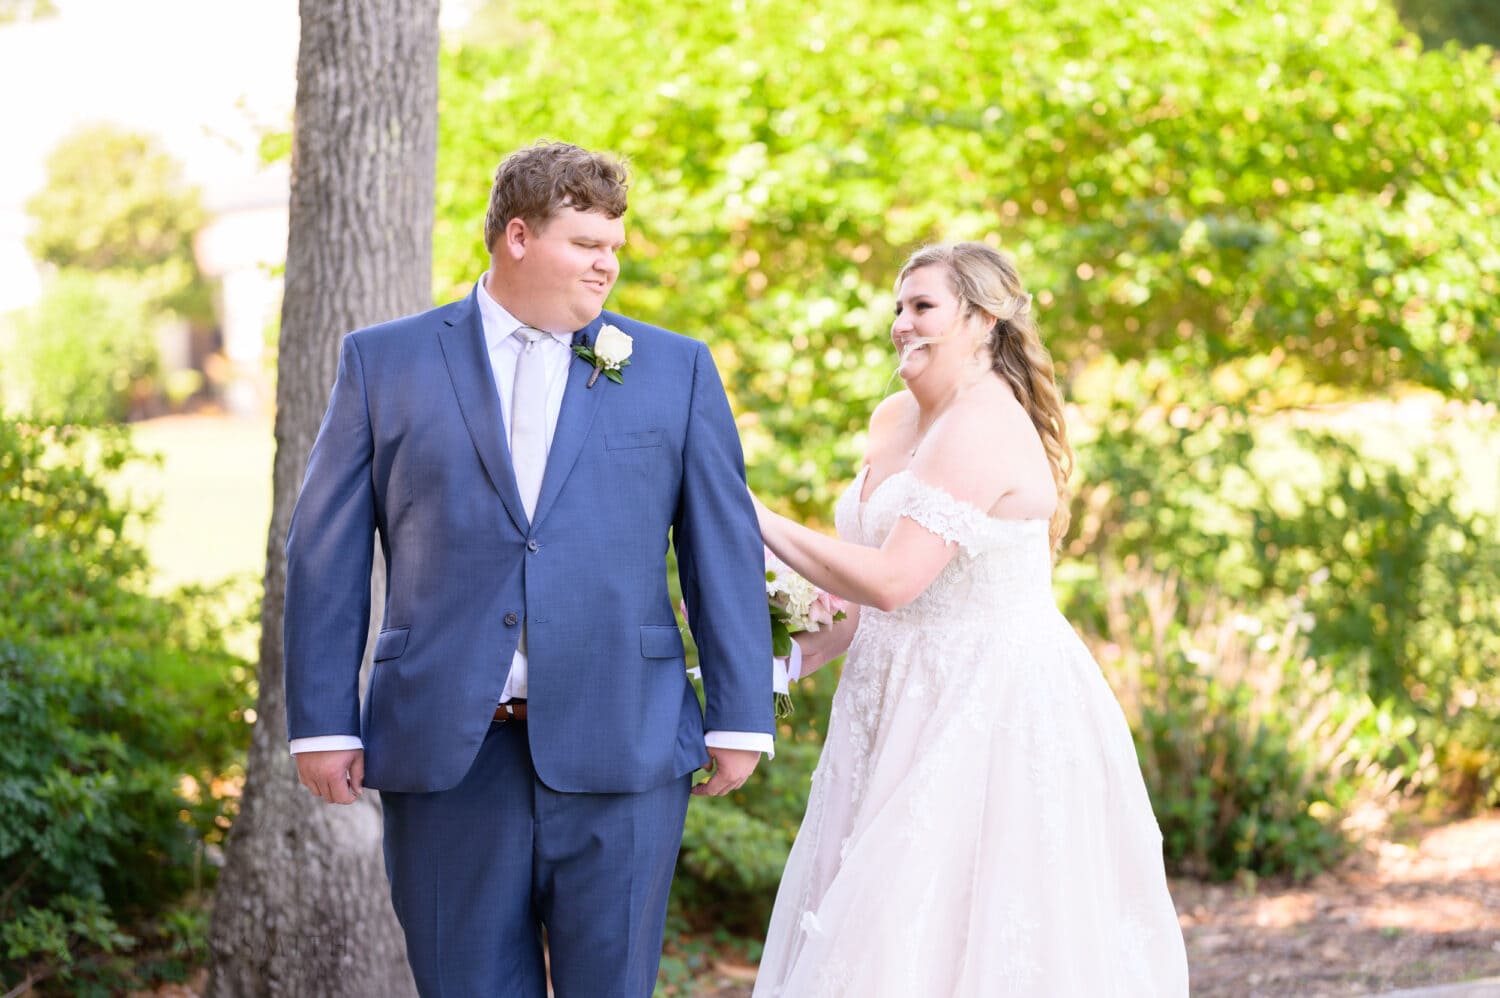 First look with the bride and groom on the golfcourse - Pawleys Plantation